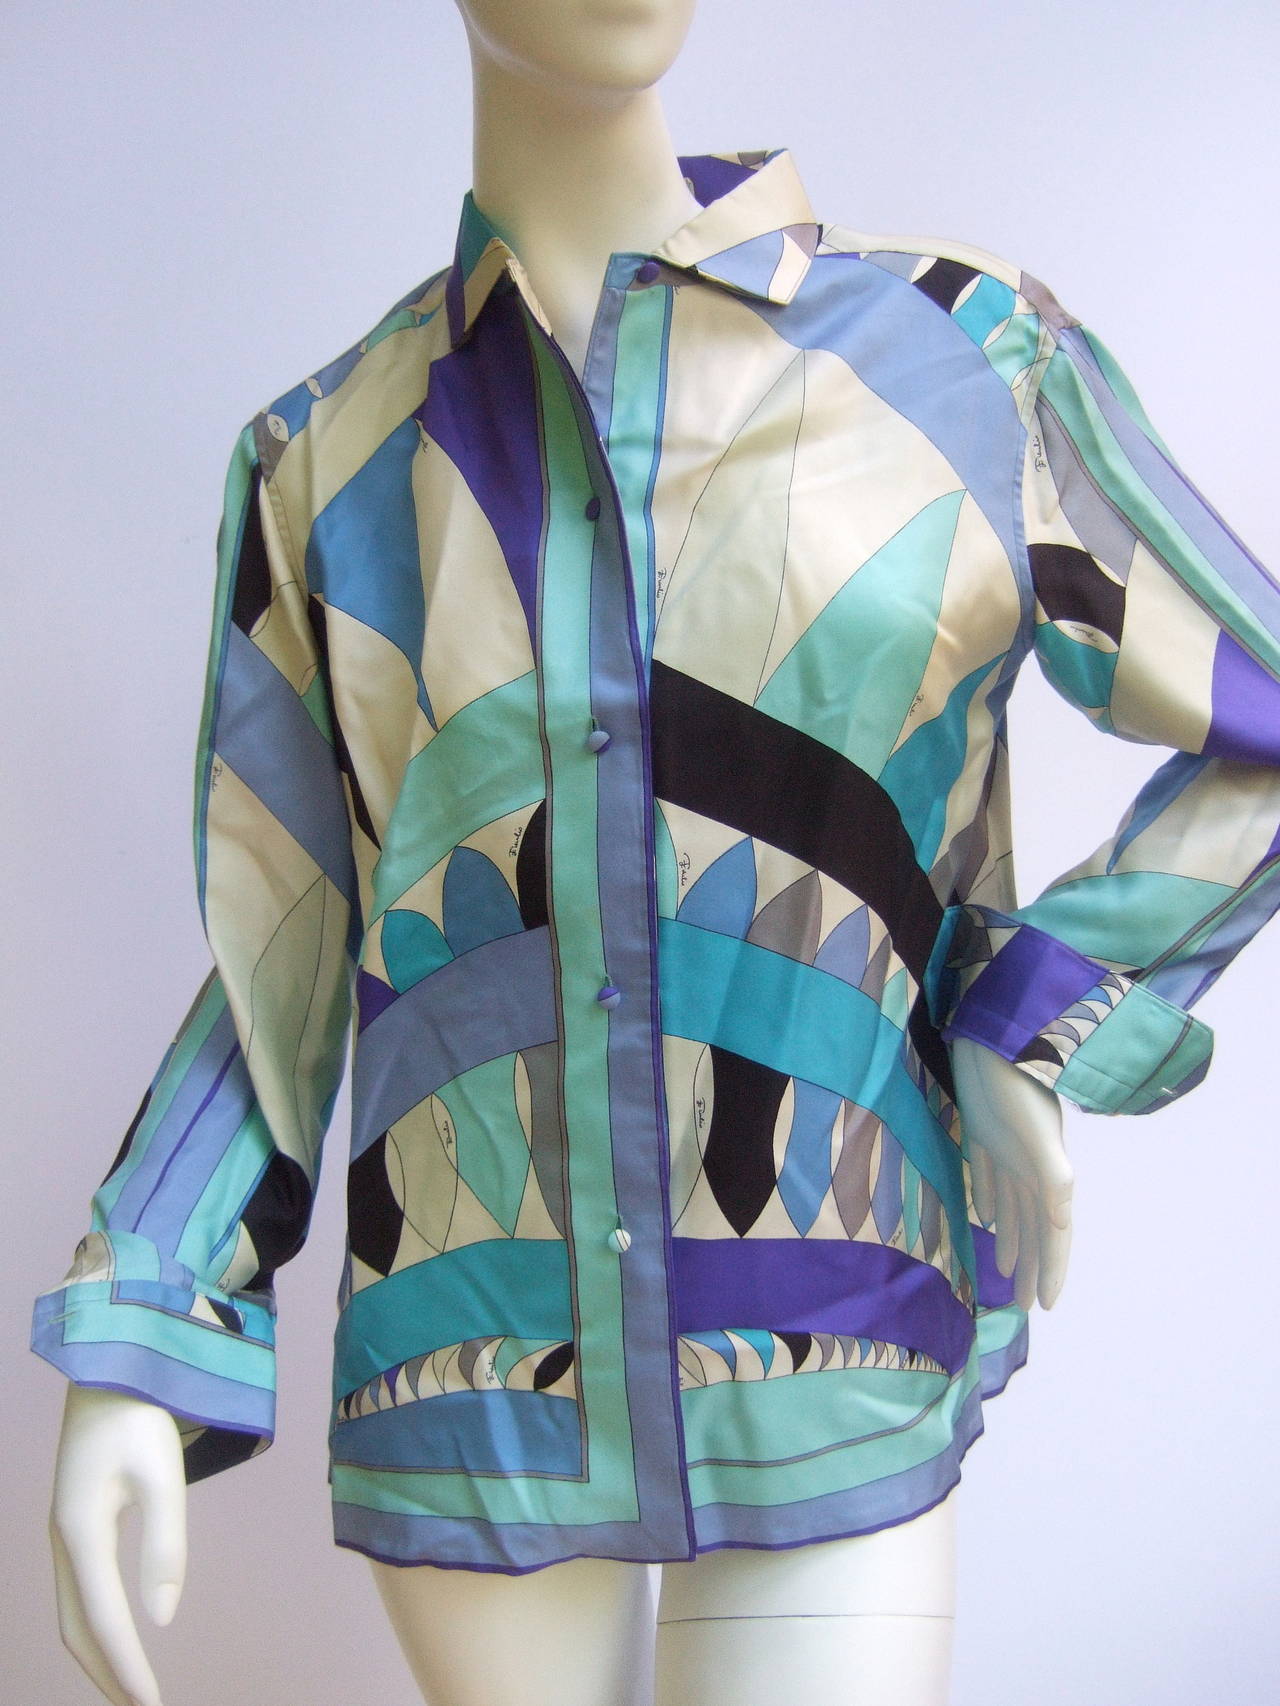 Emilio Pucci Iconic graphic print silk blouse for Saks Fifth Avenue c 1970
The vibrant op art silk print is a collage of blue hues of aqua, turquoise, azure, violet, gray & black. The bold colors illuminate against the white silk